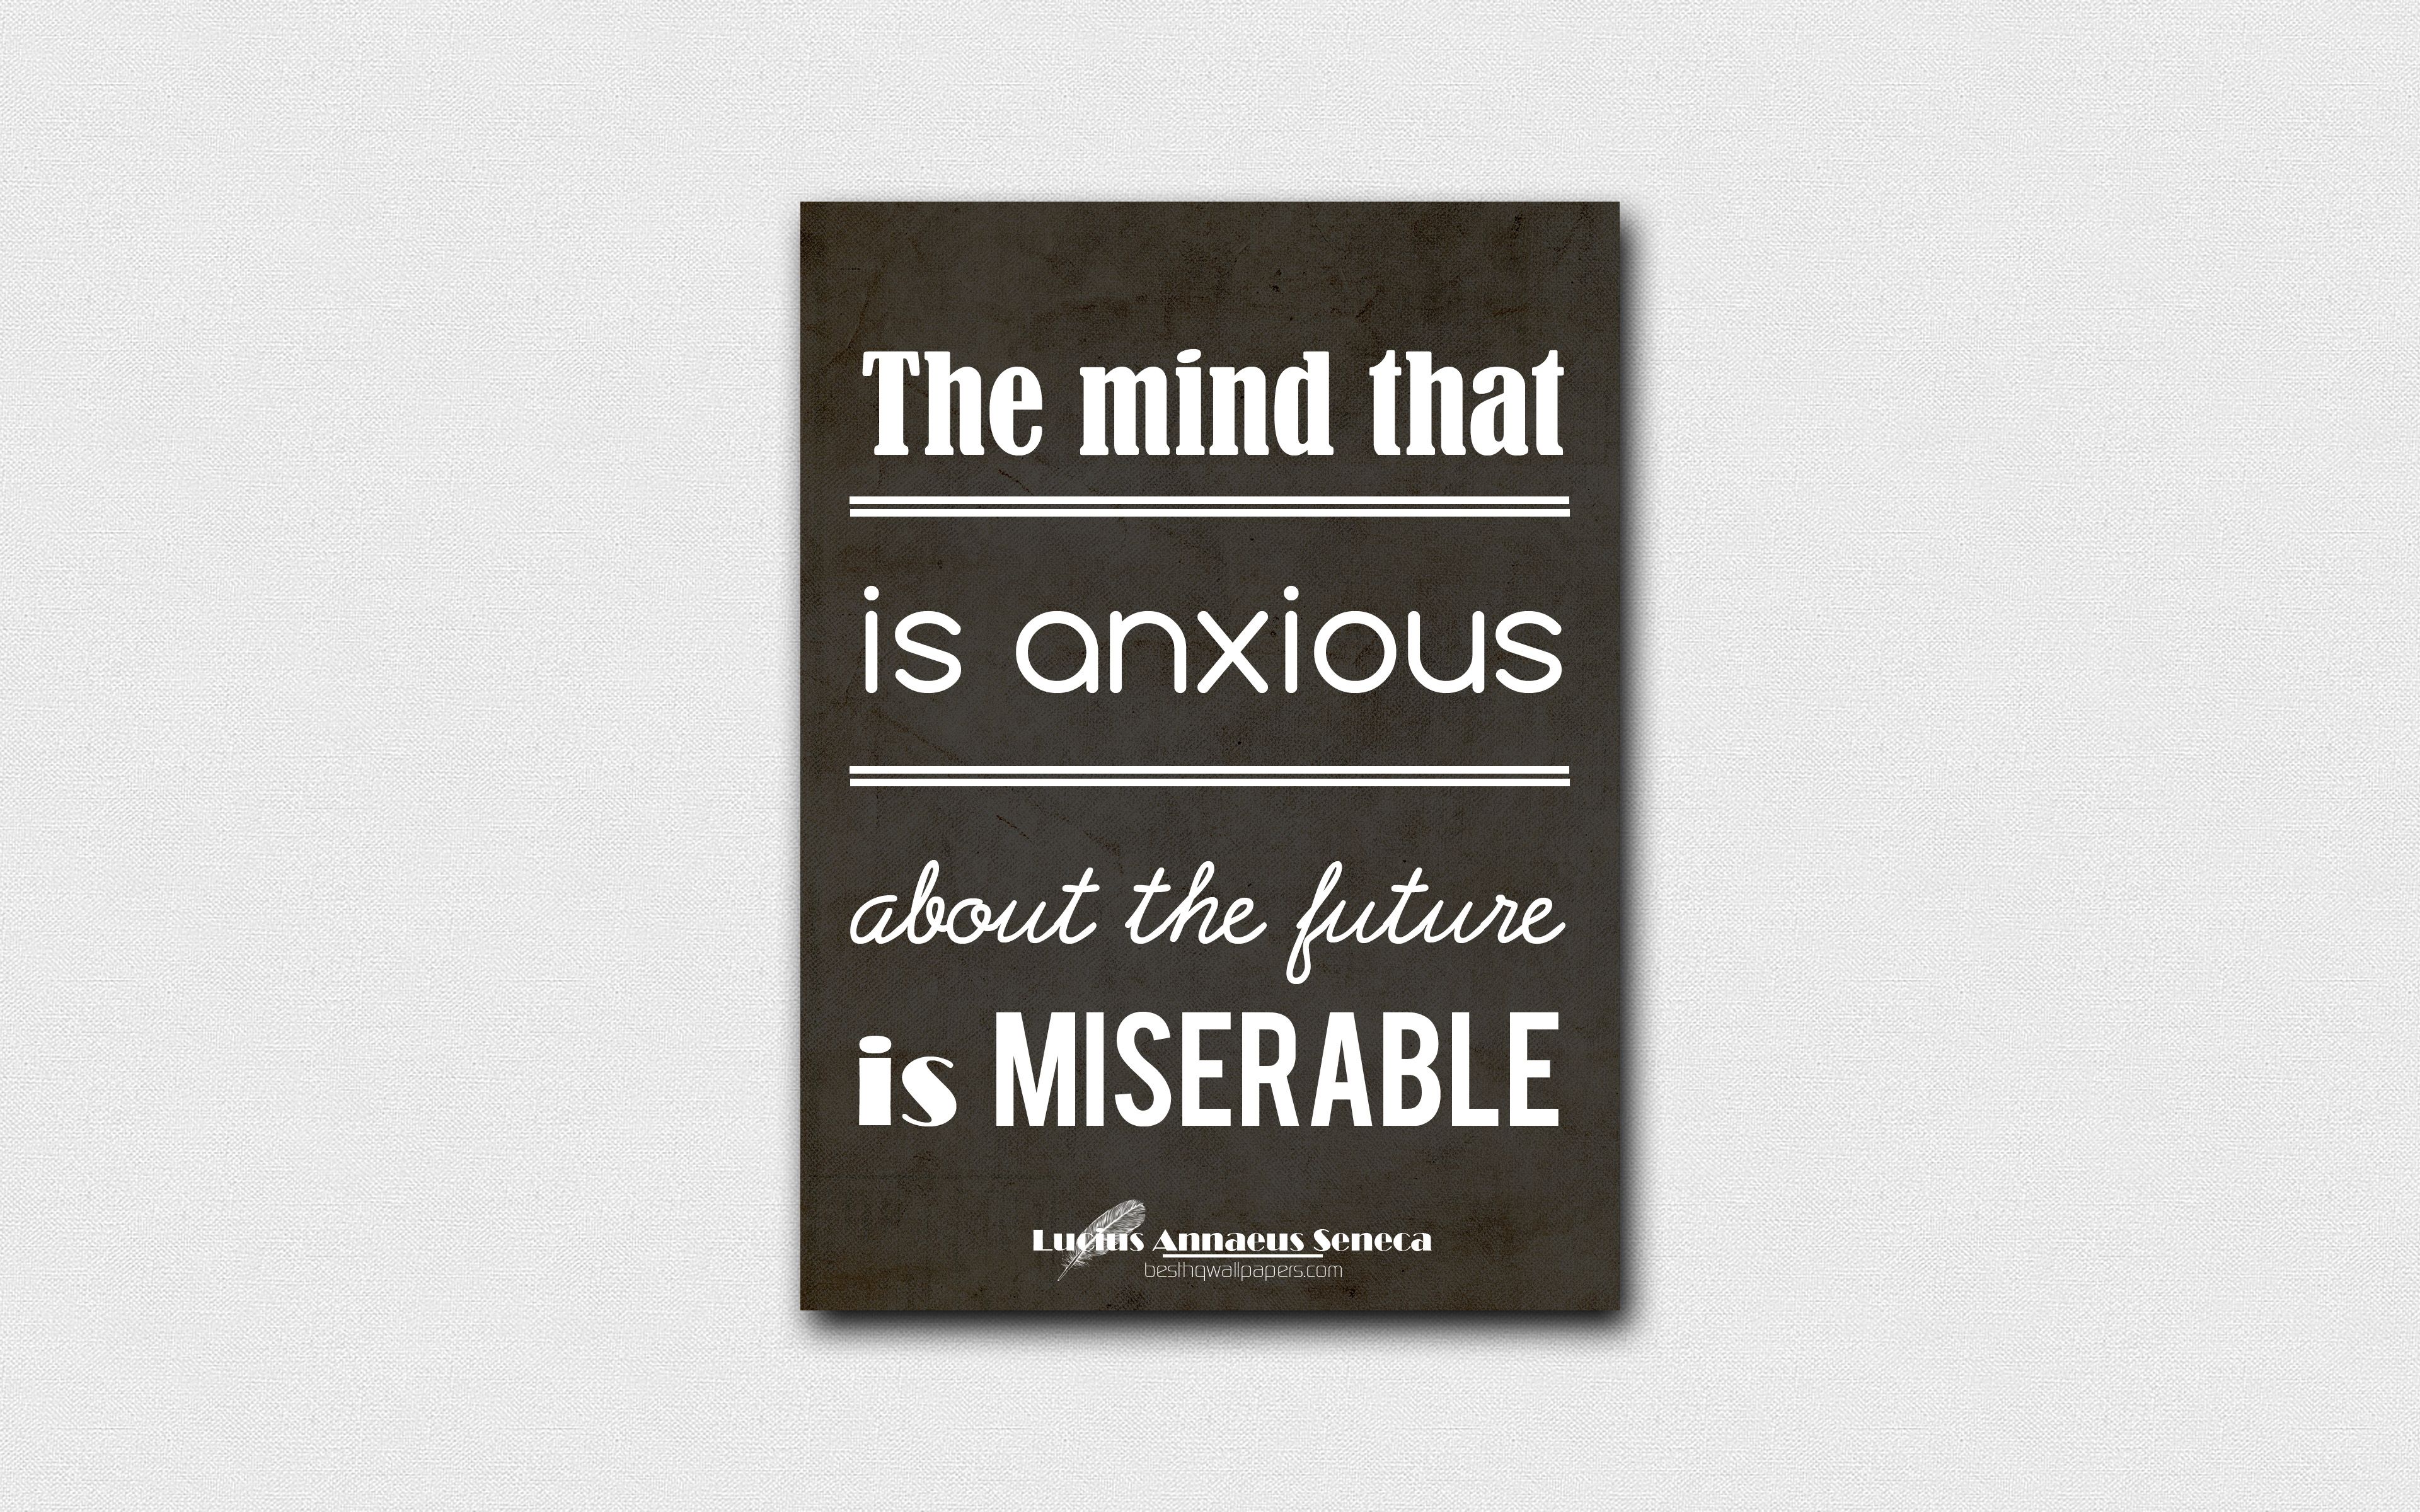 Download wallpaper 4k, The mind that is anxious about the future is miserable, quotes about mind, Lucius Annaeus Seneca, black paper, popular quotes, inspiration, Lucius Annaeus Seneca quotes for desktop with resolution